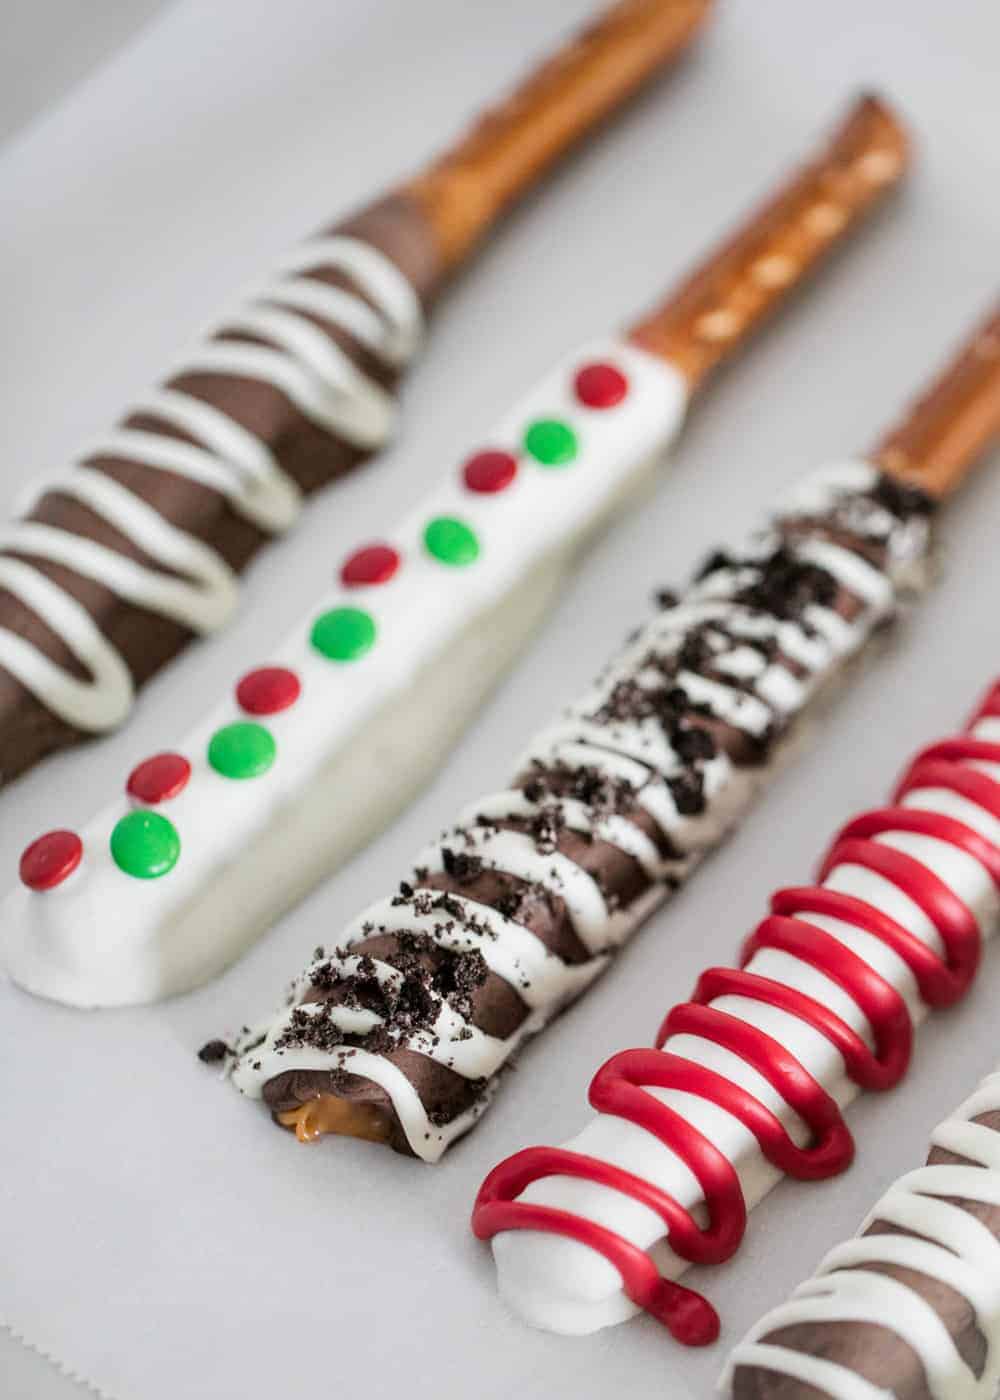 Chocolate covered pretzel rods with toppings.